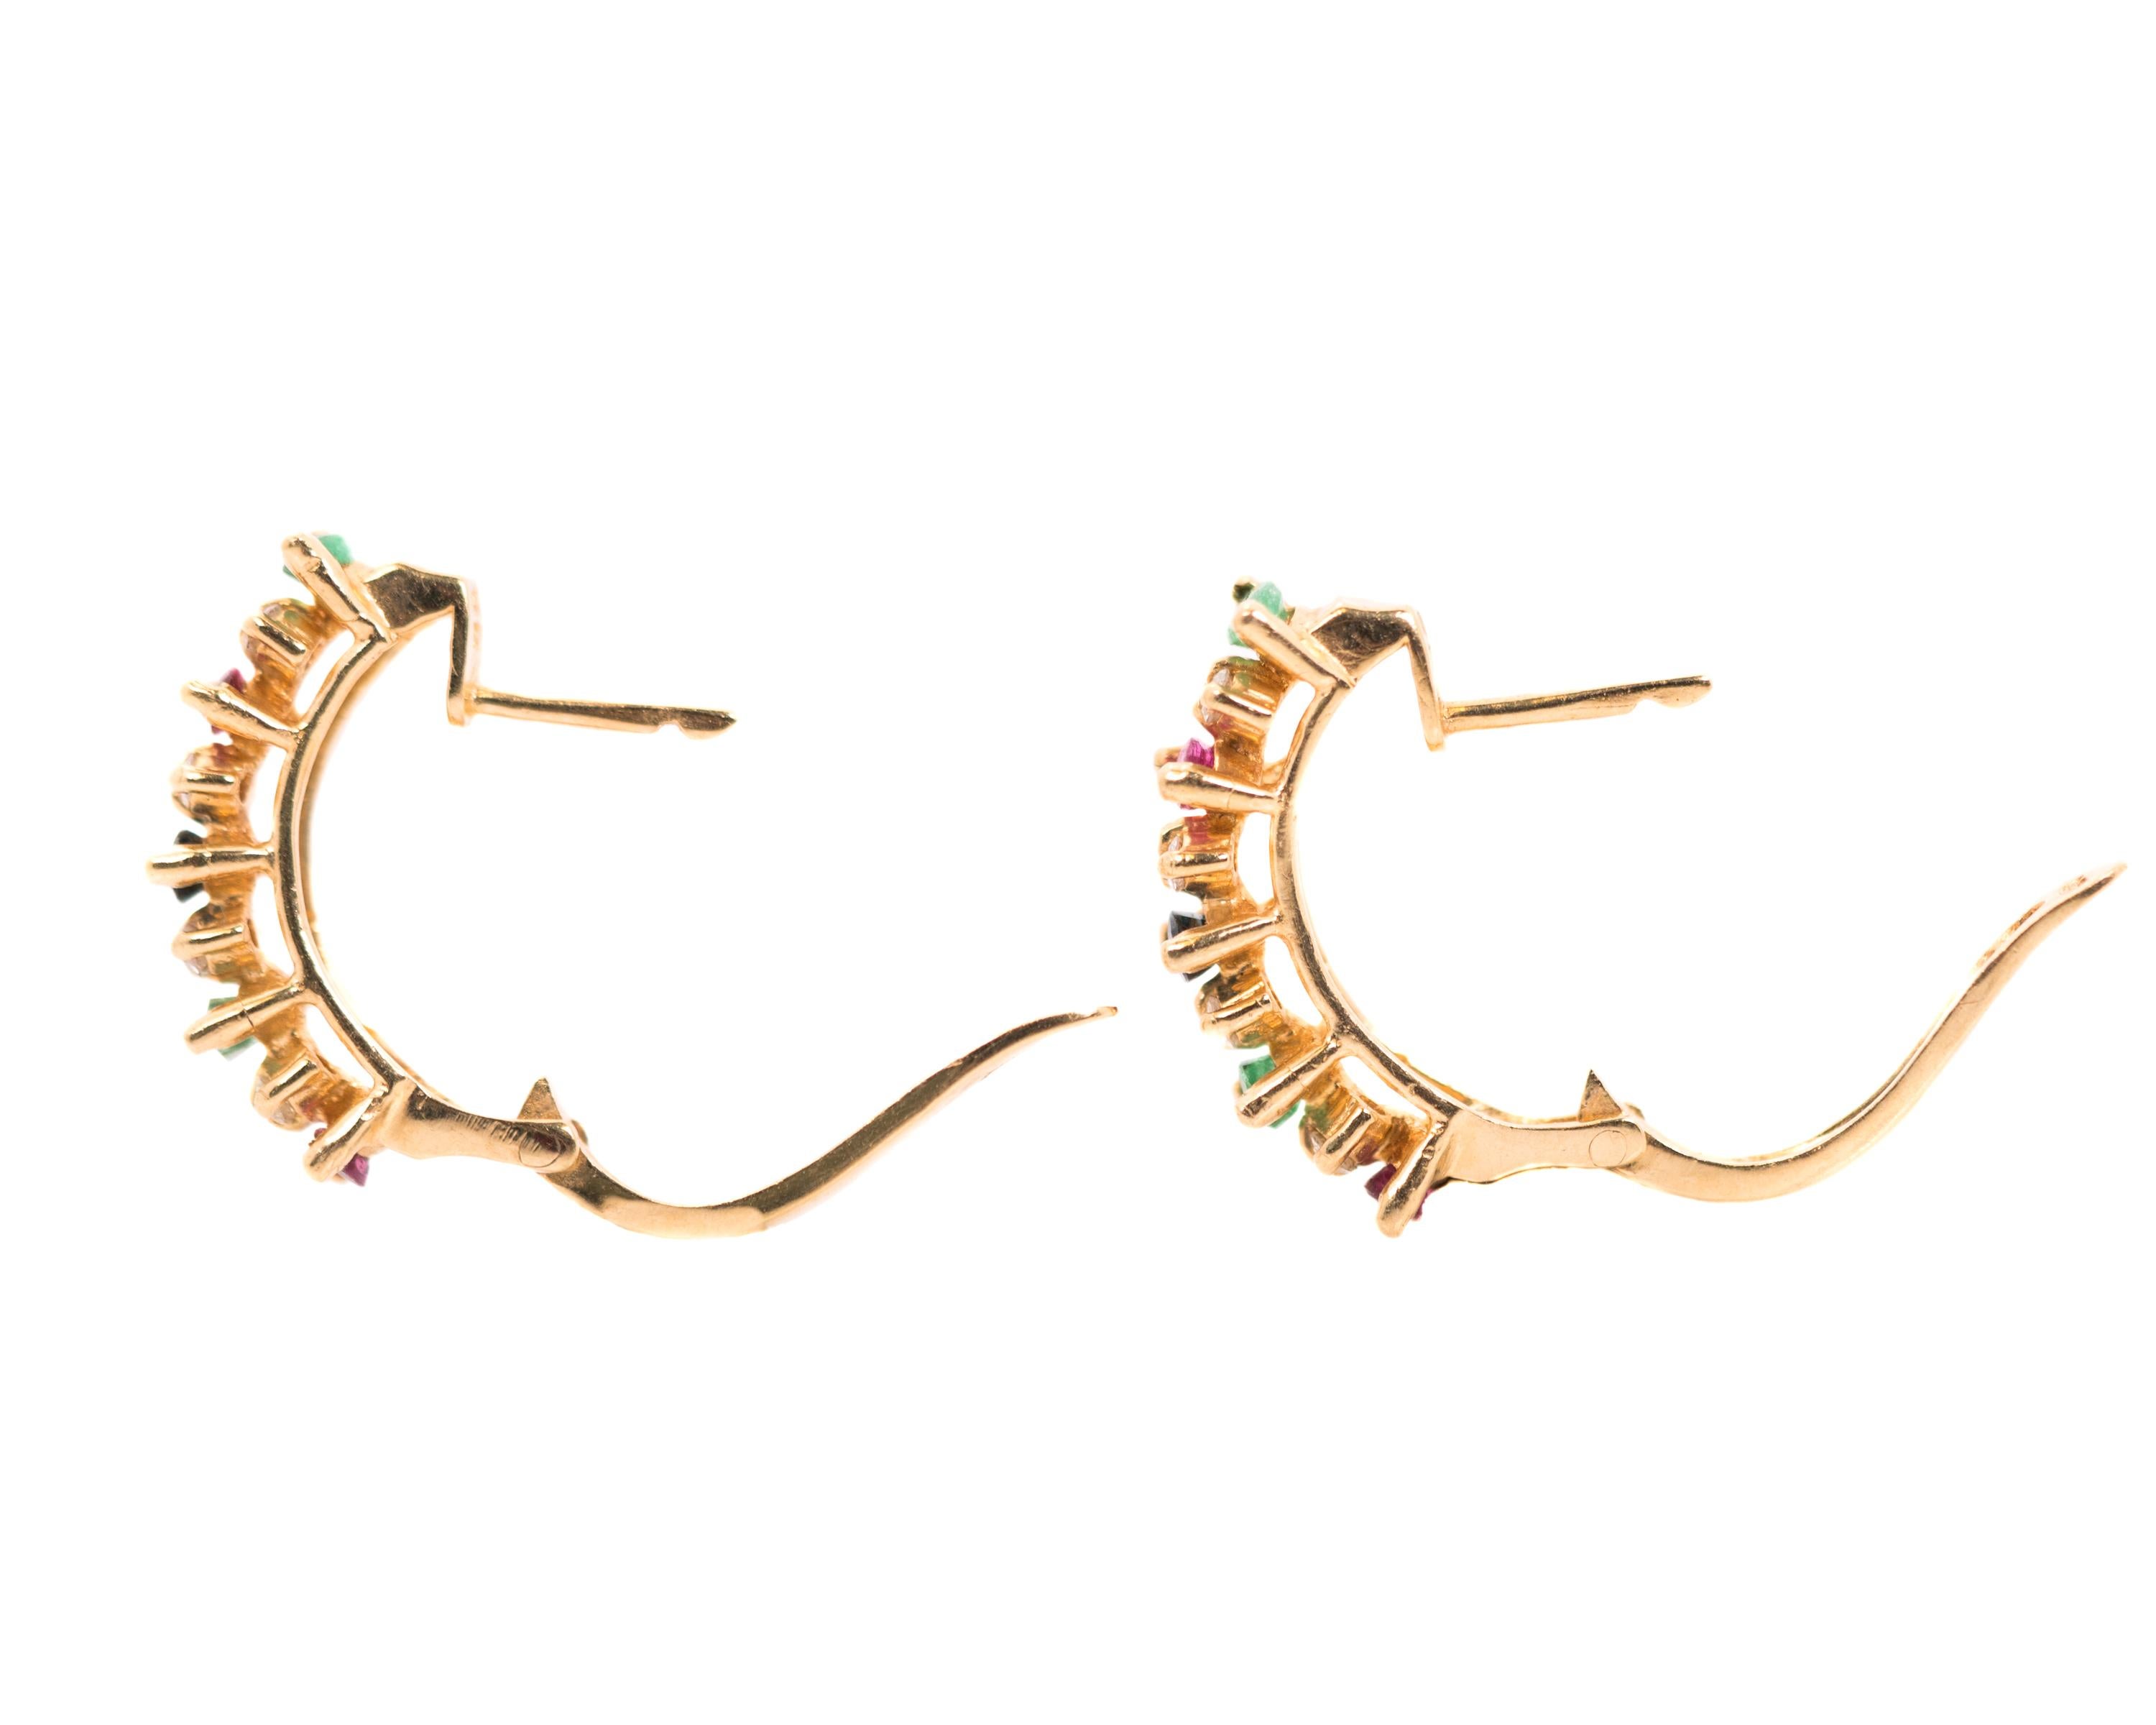 Contemporary Diamond, Emerald, Ruby and Sapphire 14 Karat Yellow Gold Hoop Earrings, 1970s For Sale